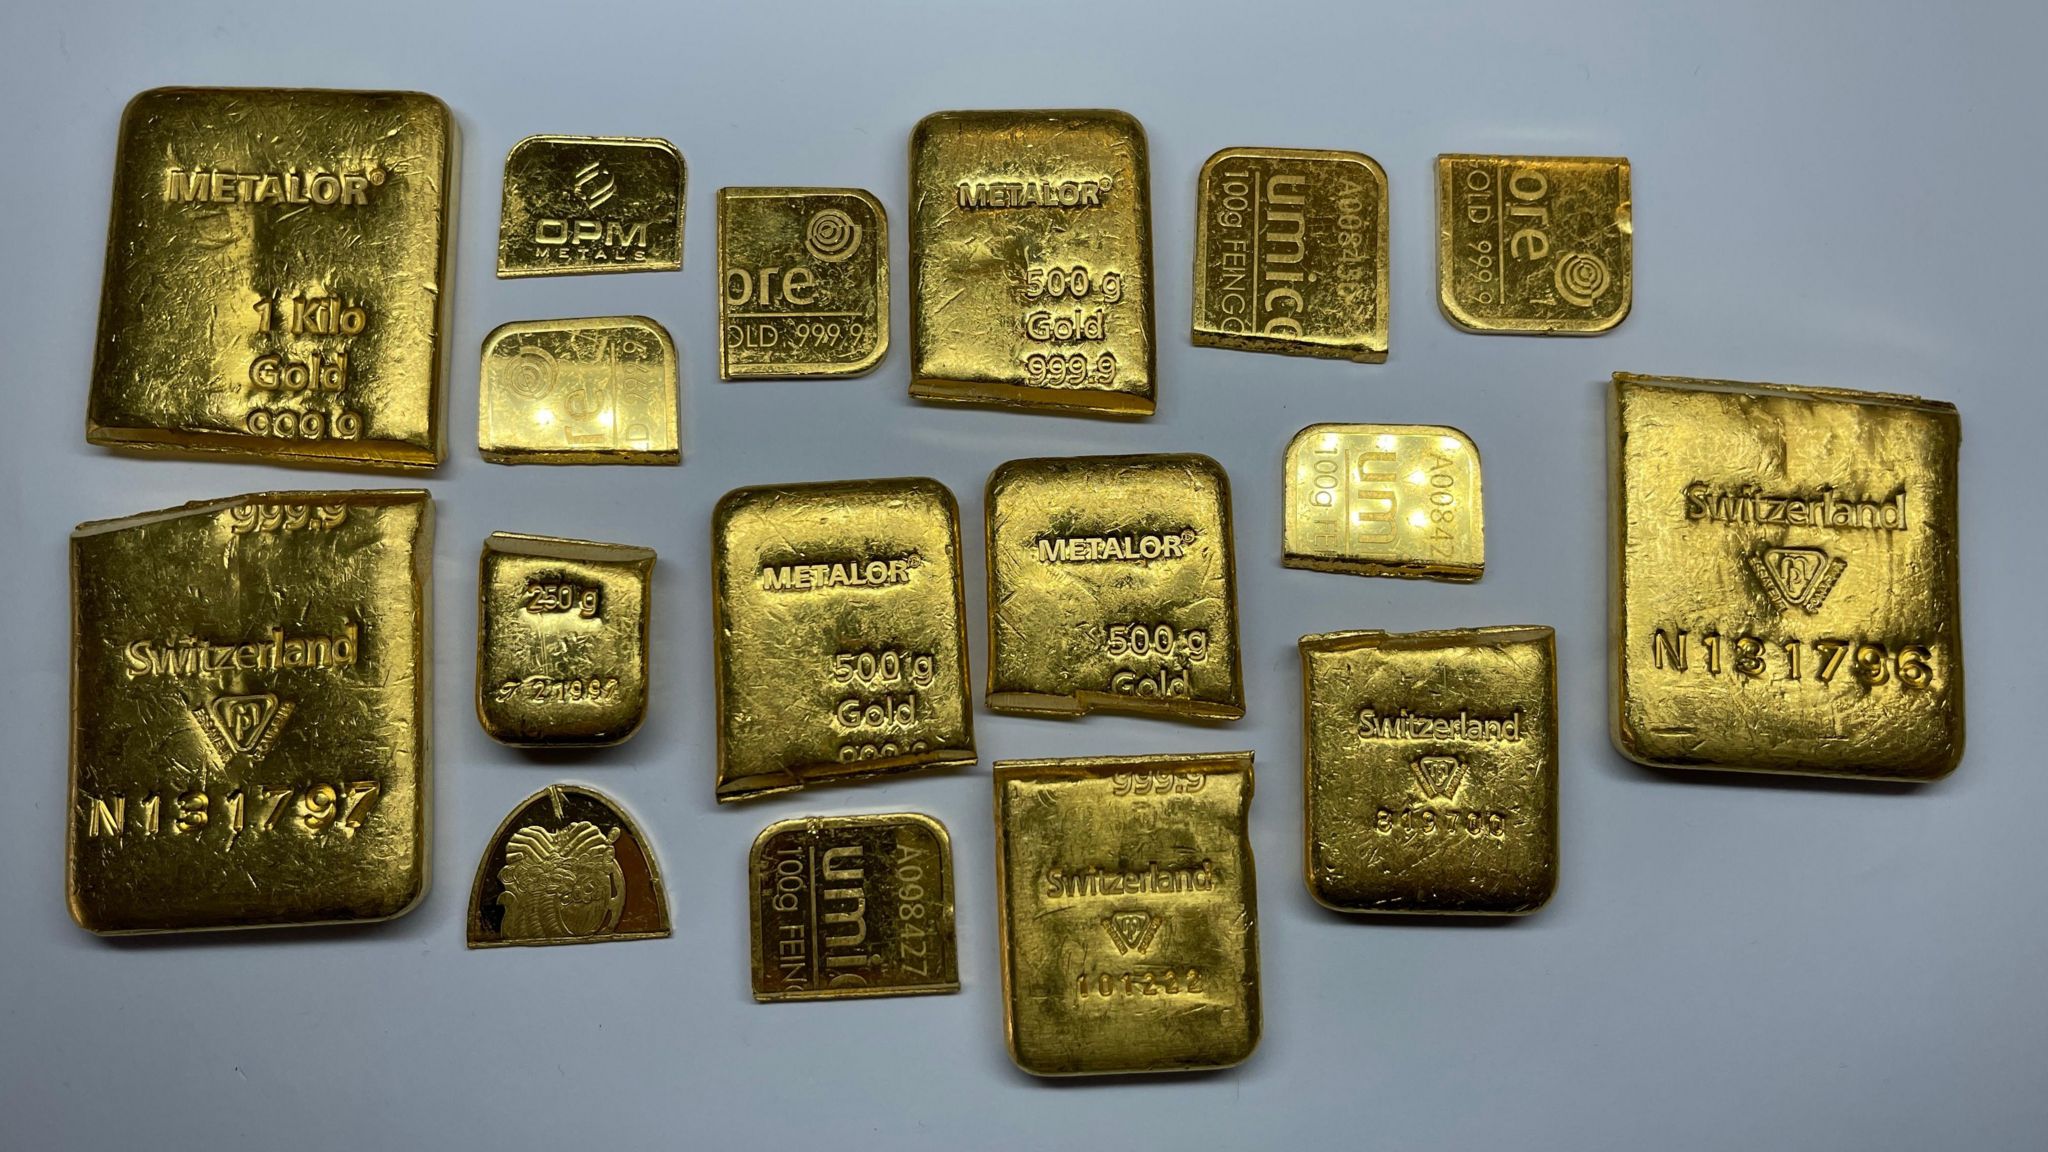 Pieces of gold seized from Lenn Mayhew-Lewis